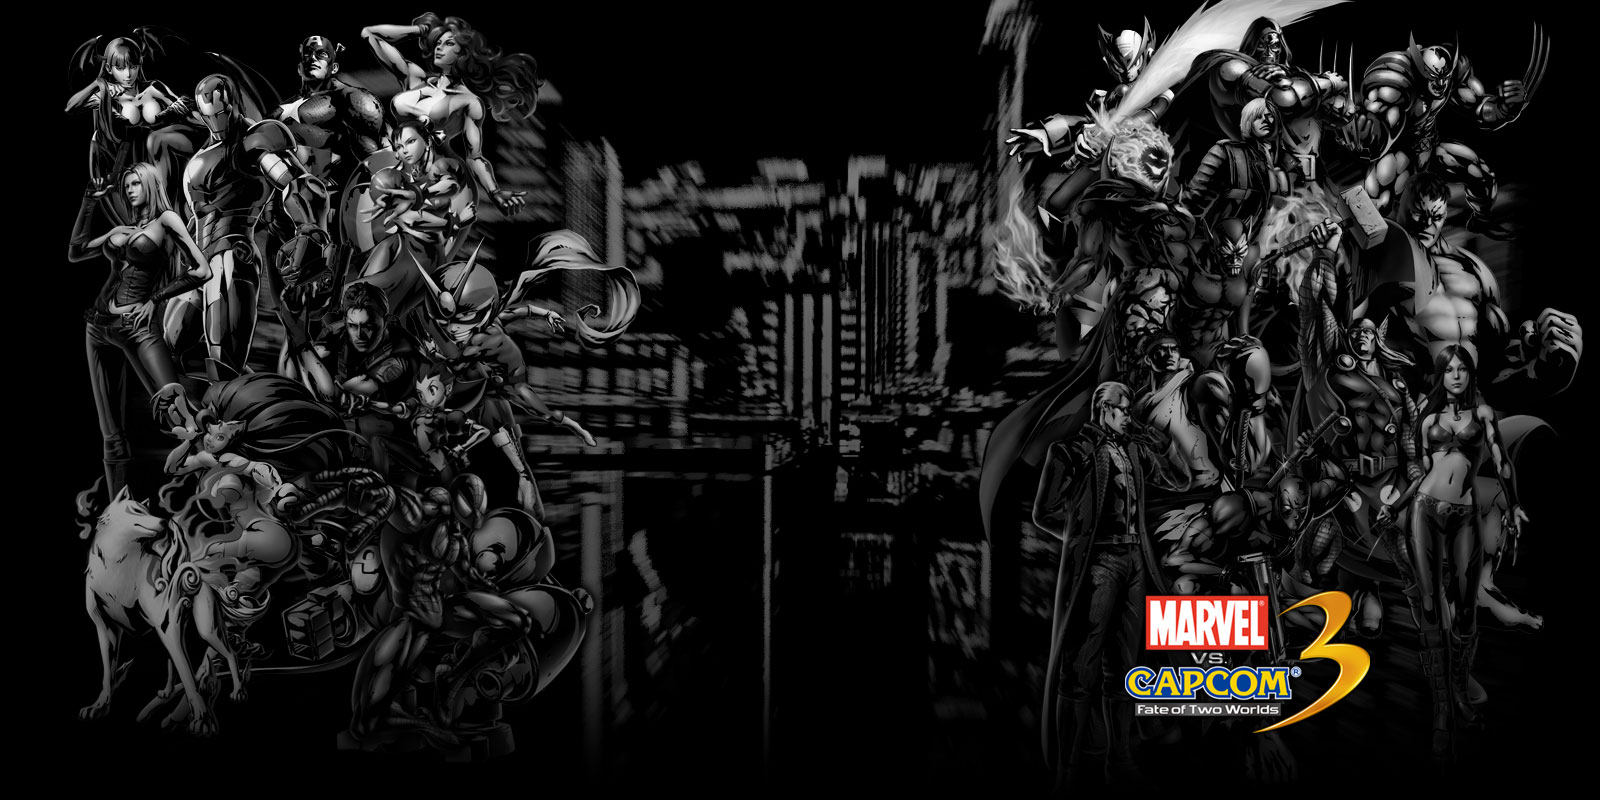 Marvel vs. Capcom 3: Fate of Two Worlds Wallpapers